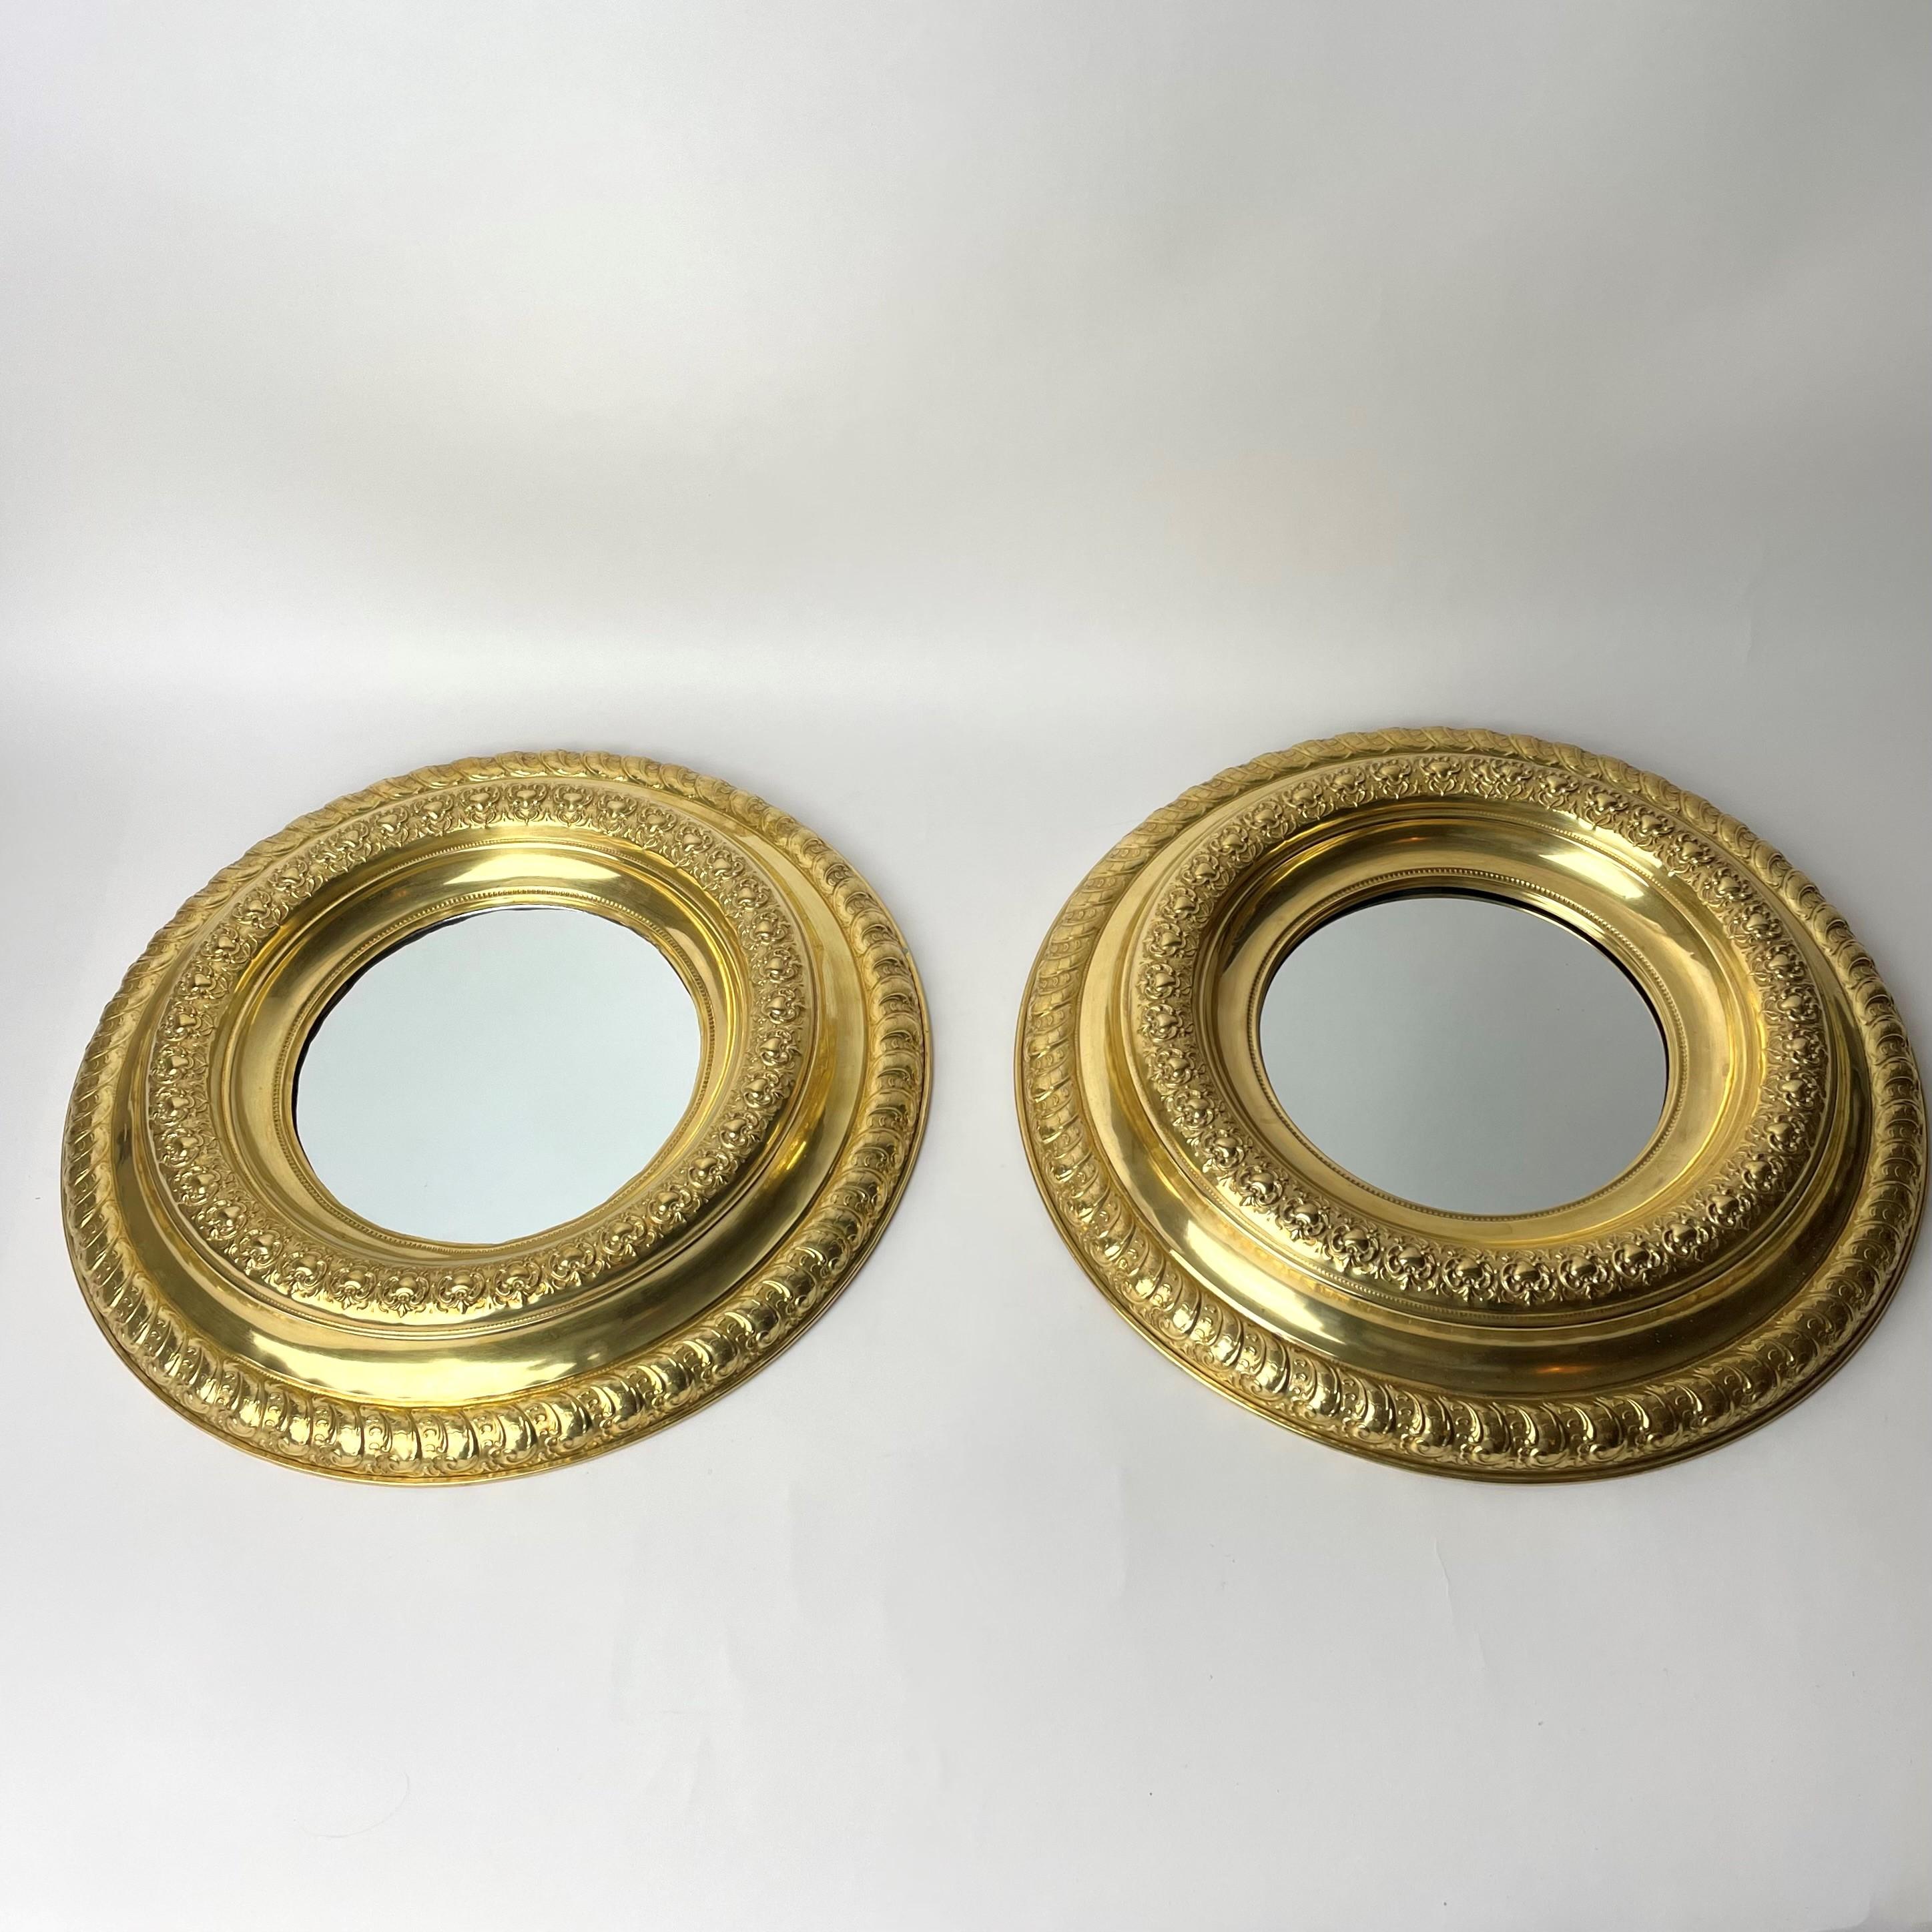 European Beautiful Pair of Wall Mirrors in Brass from Late 19th Century For Sale